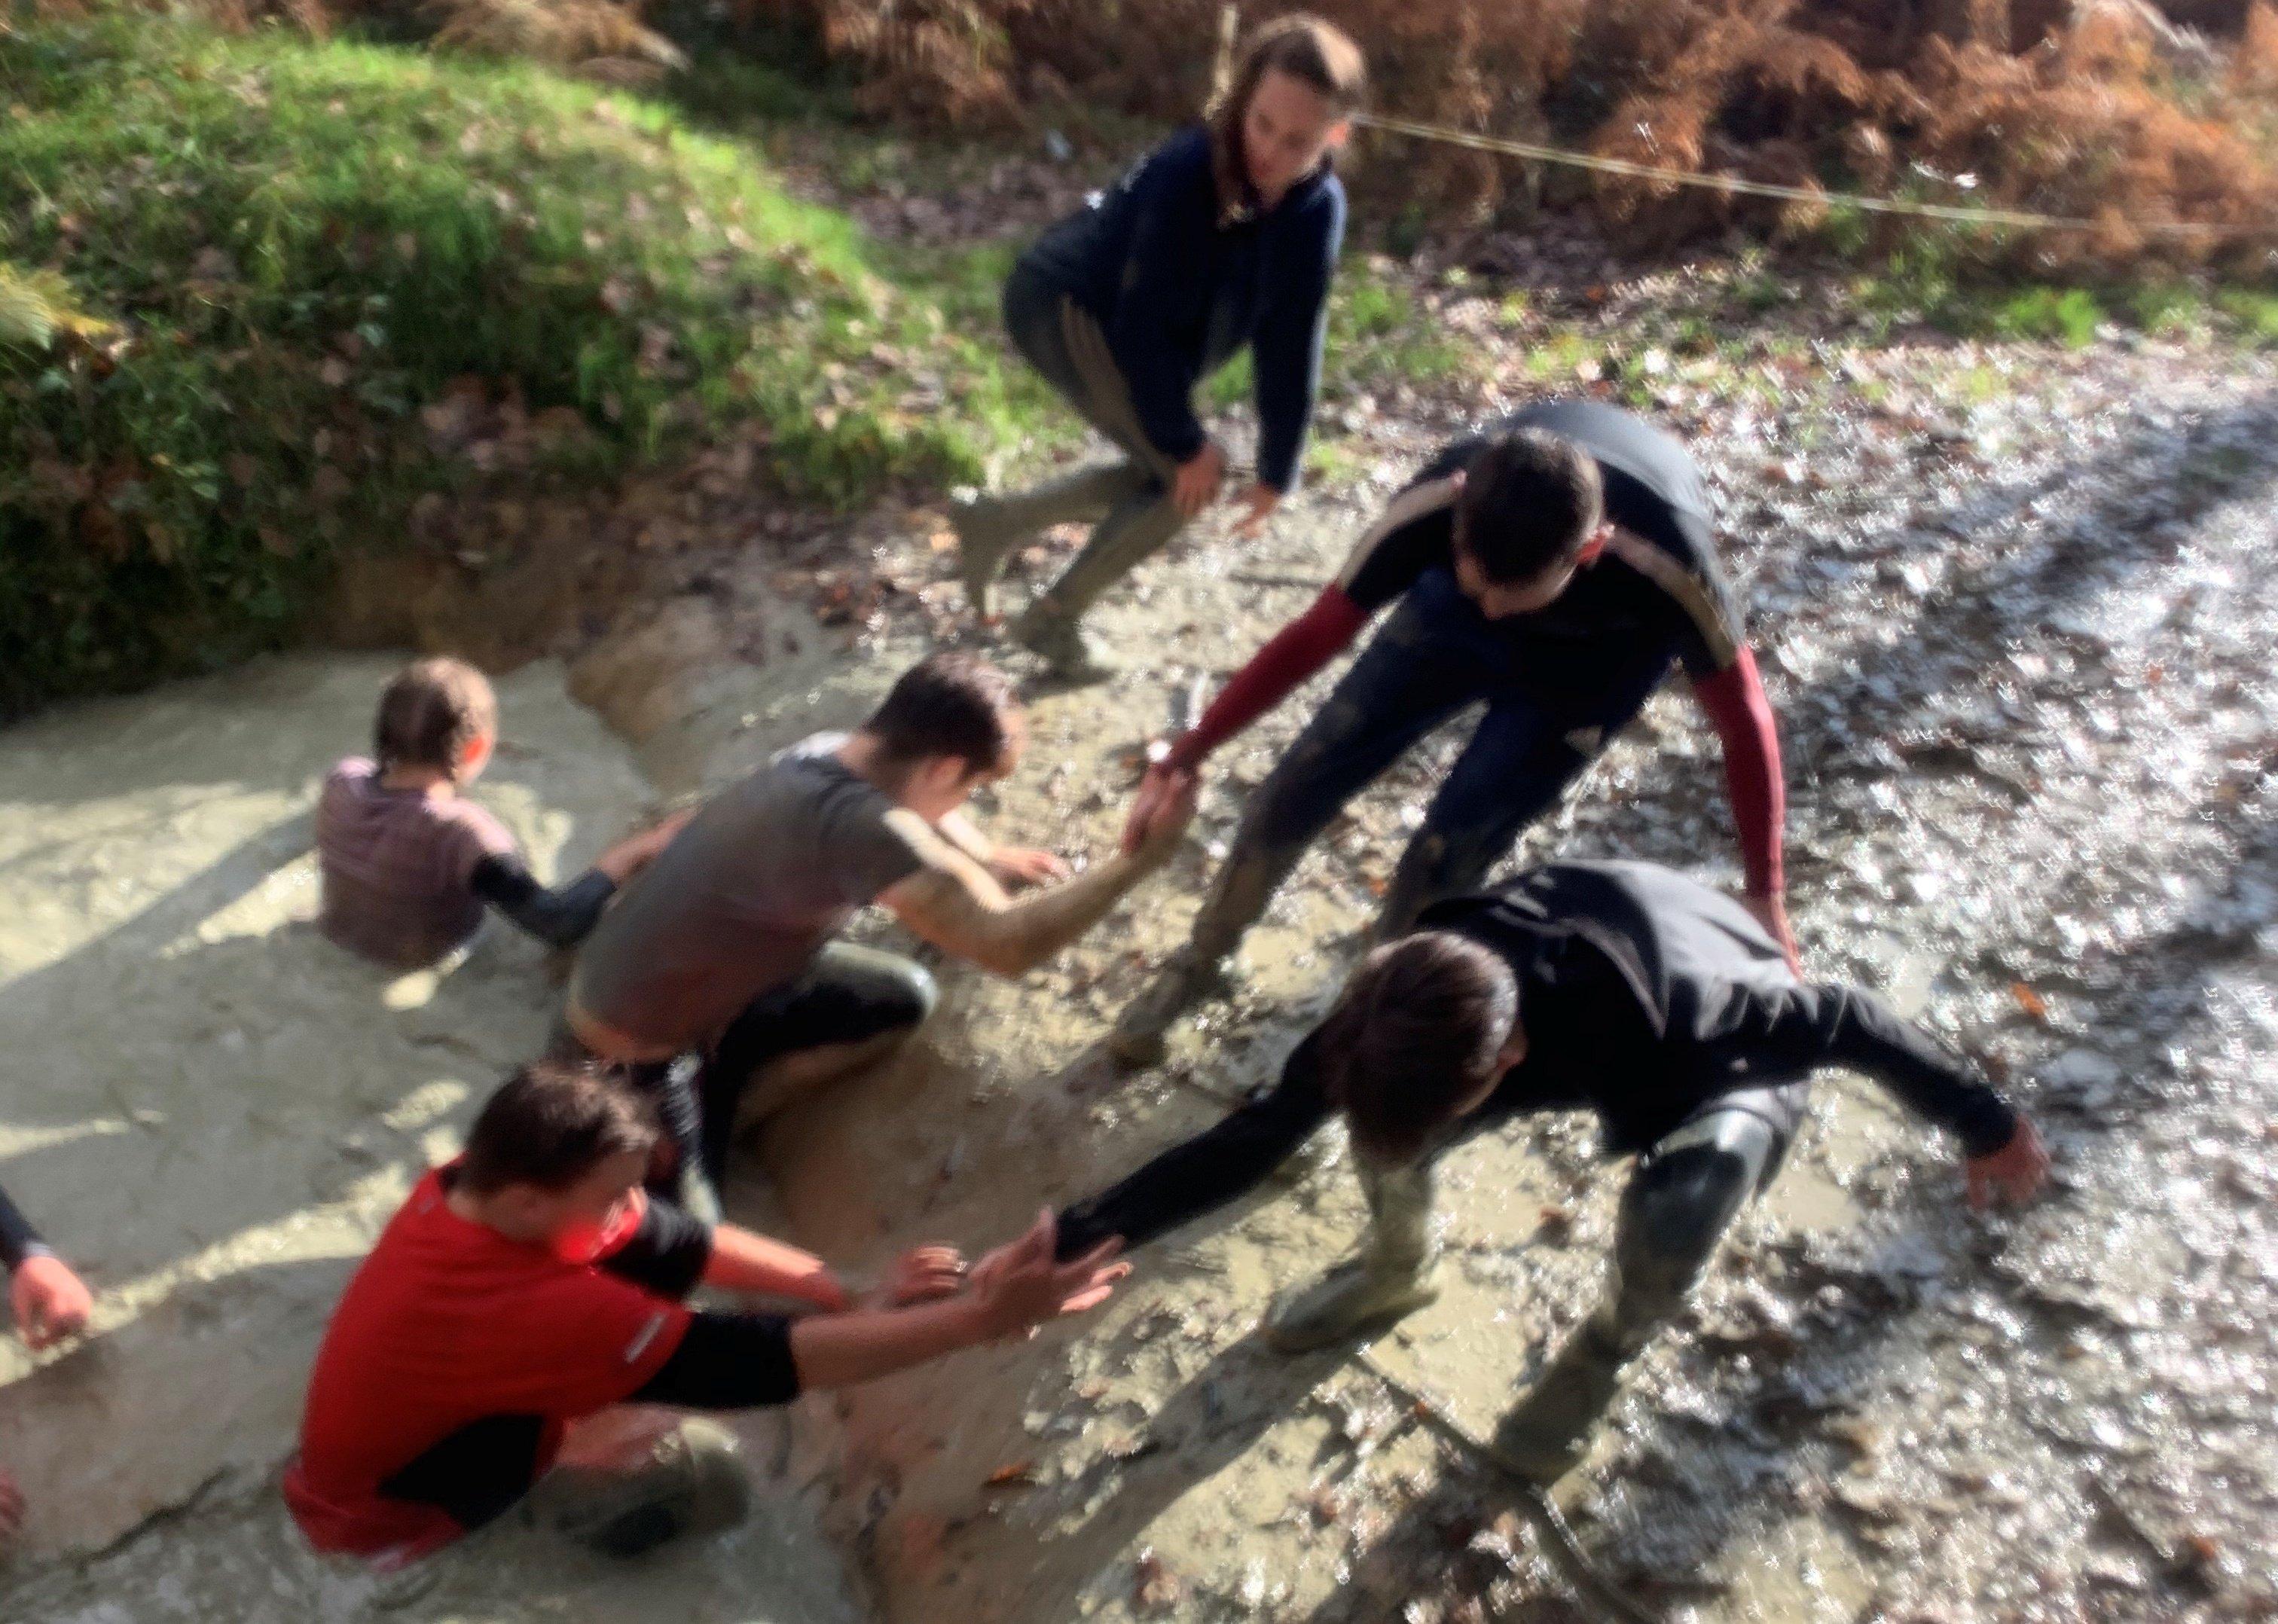 More than 100 year-11 students and 18 staff from Durrington High School tackled the challenging assault course at Henfold Lakes in Dorking